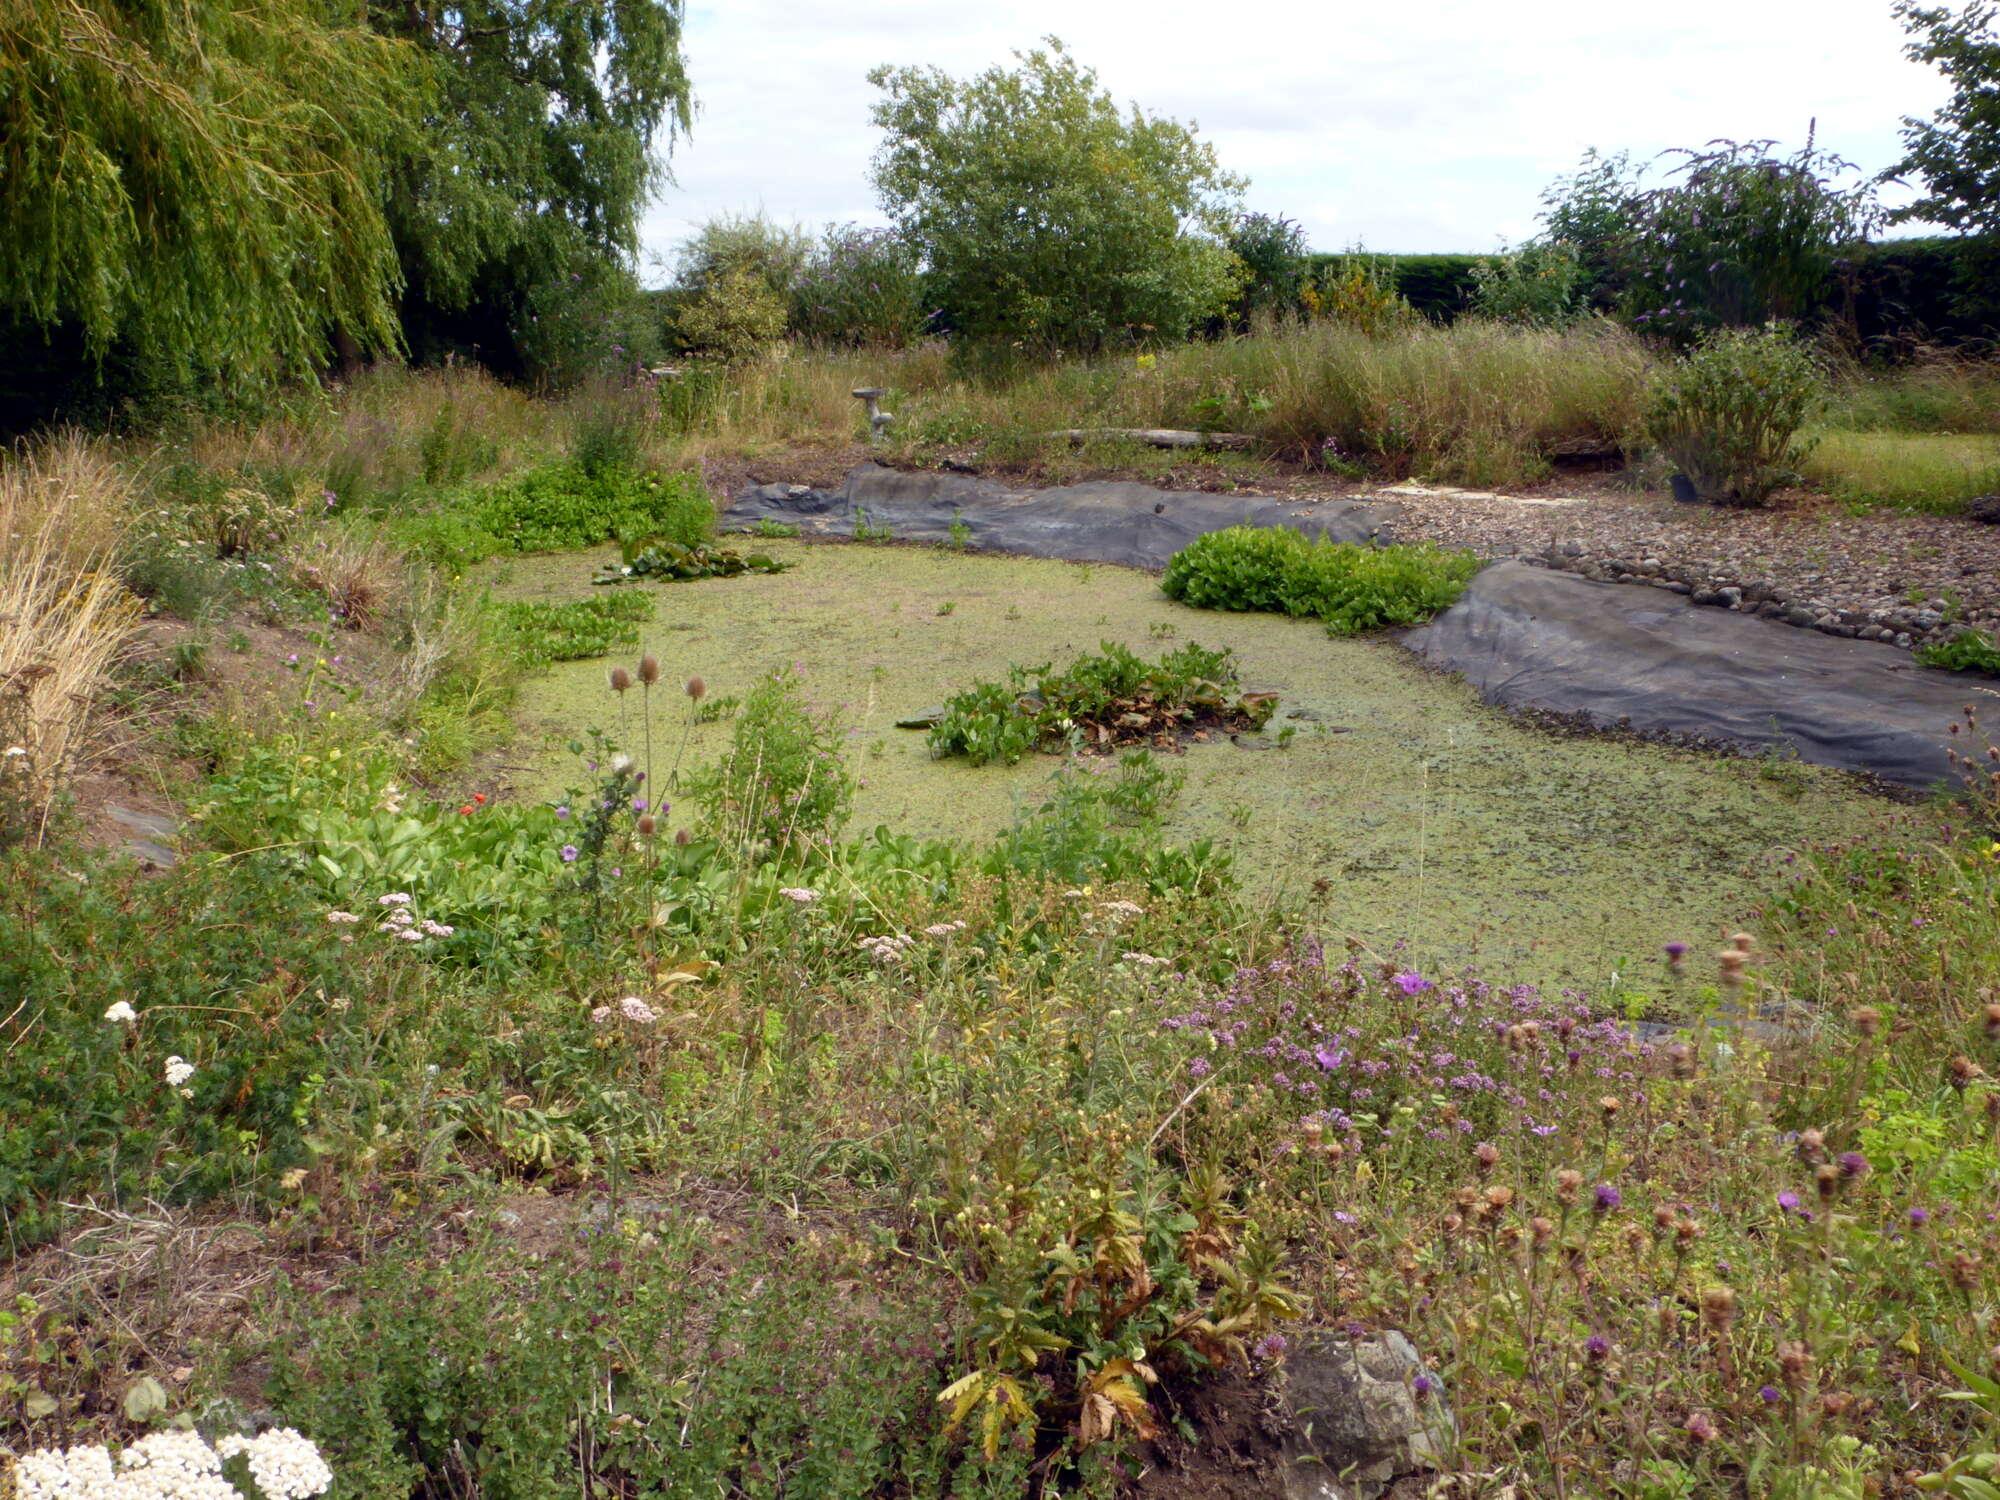 A major drying up of the pond during summer at least creates a marsh habitat, better for butterflies. This may have to be the way forward.